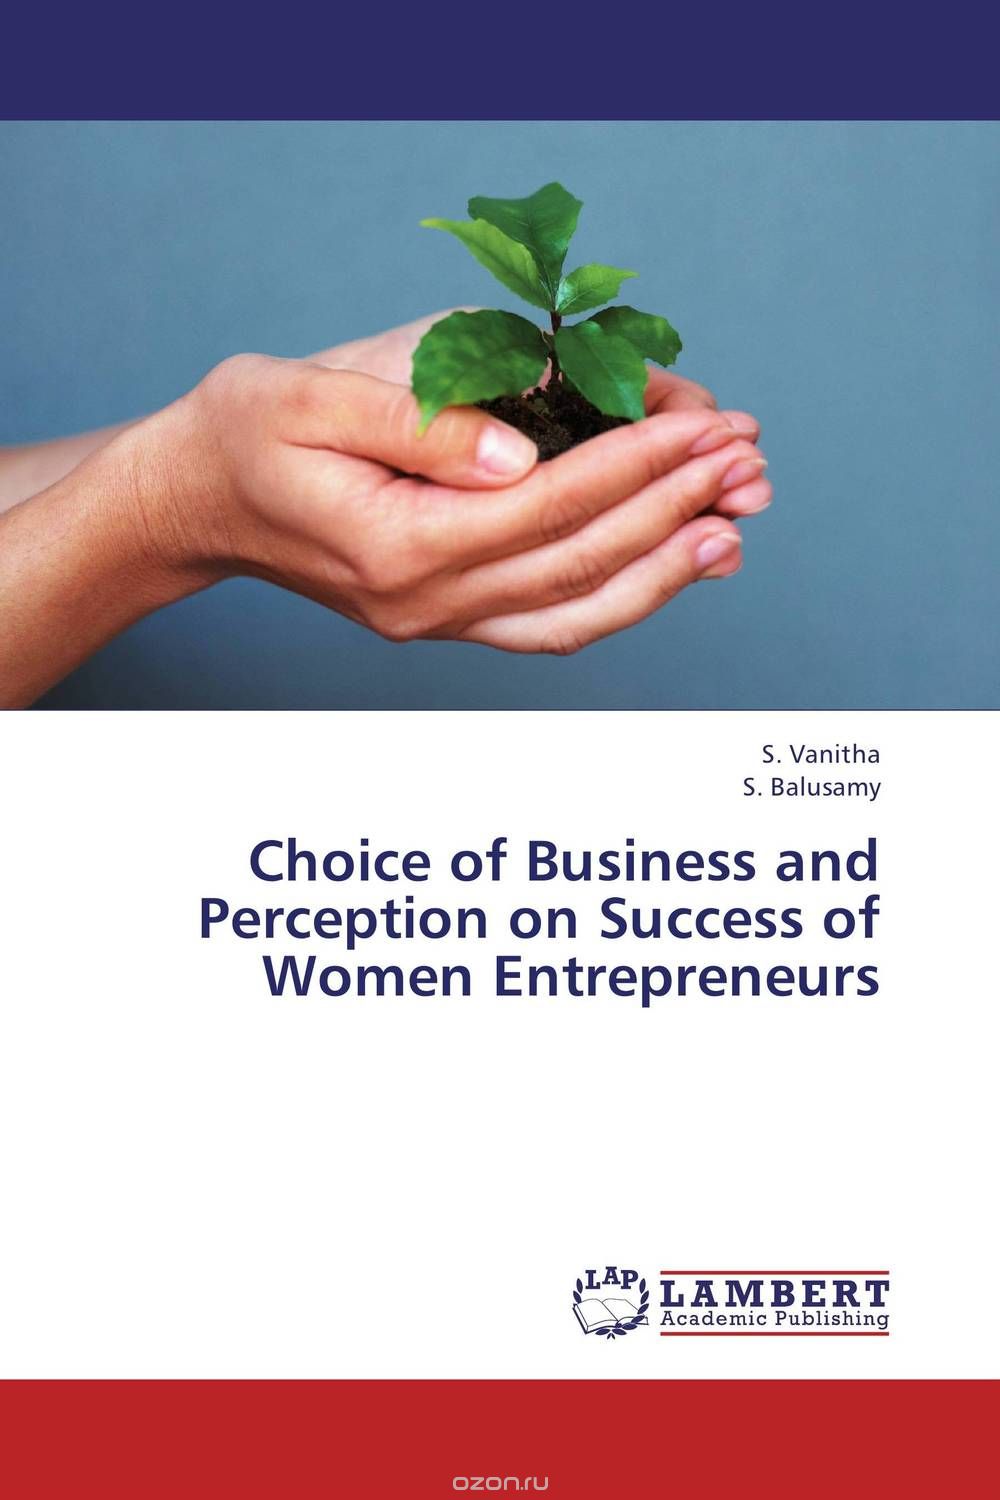 Choice of Business and Perception on Success of Women Entrepreneurs